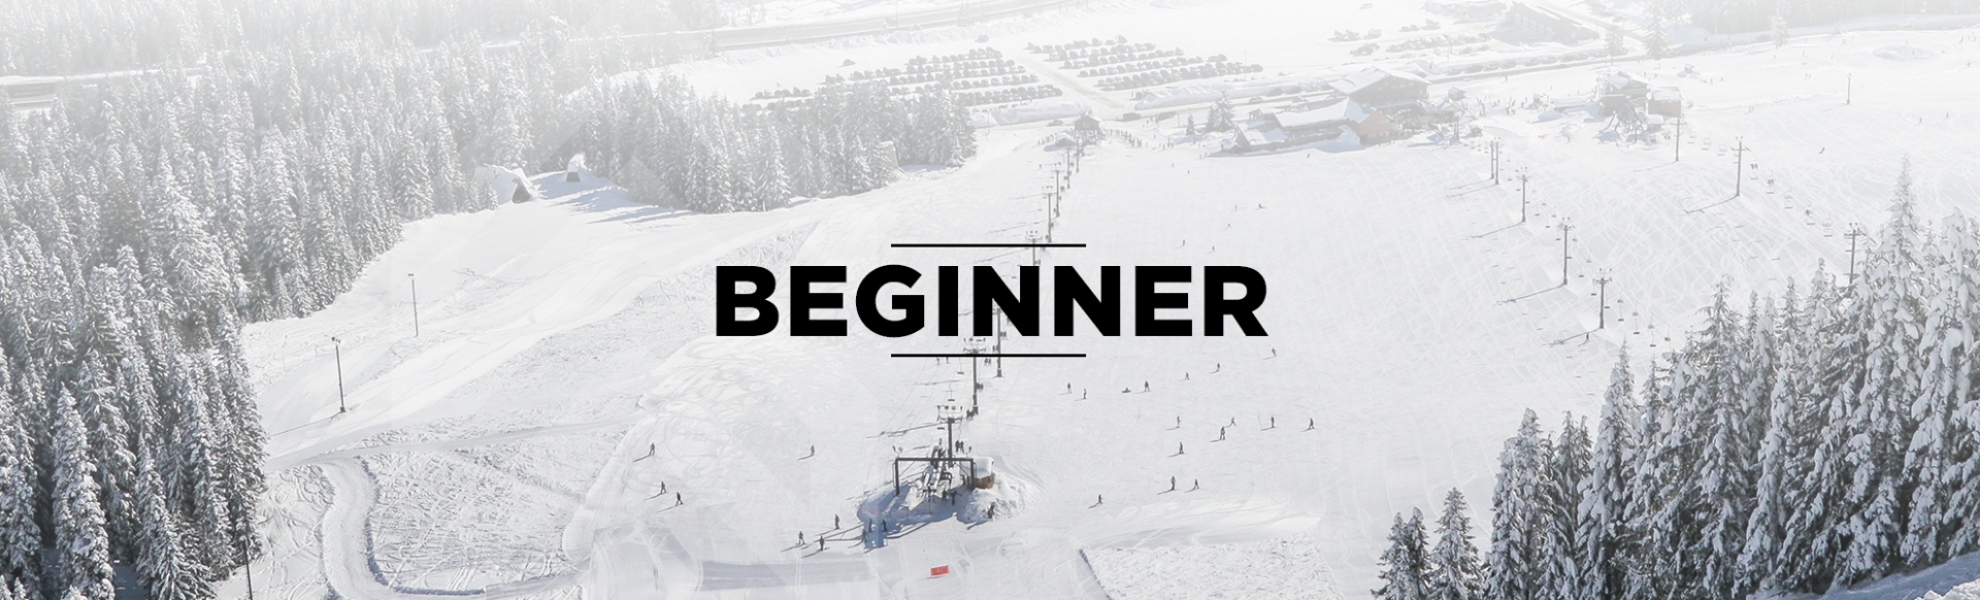 Picture of Beginner Lift Tickets